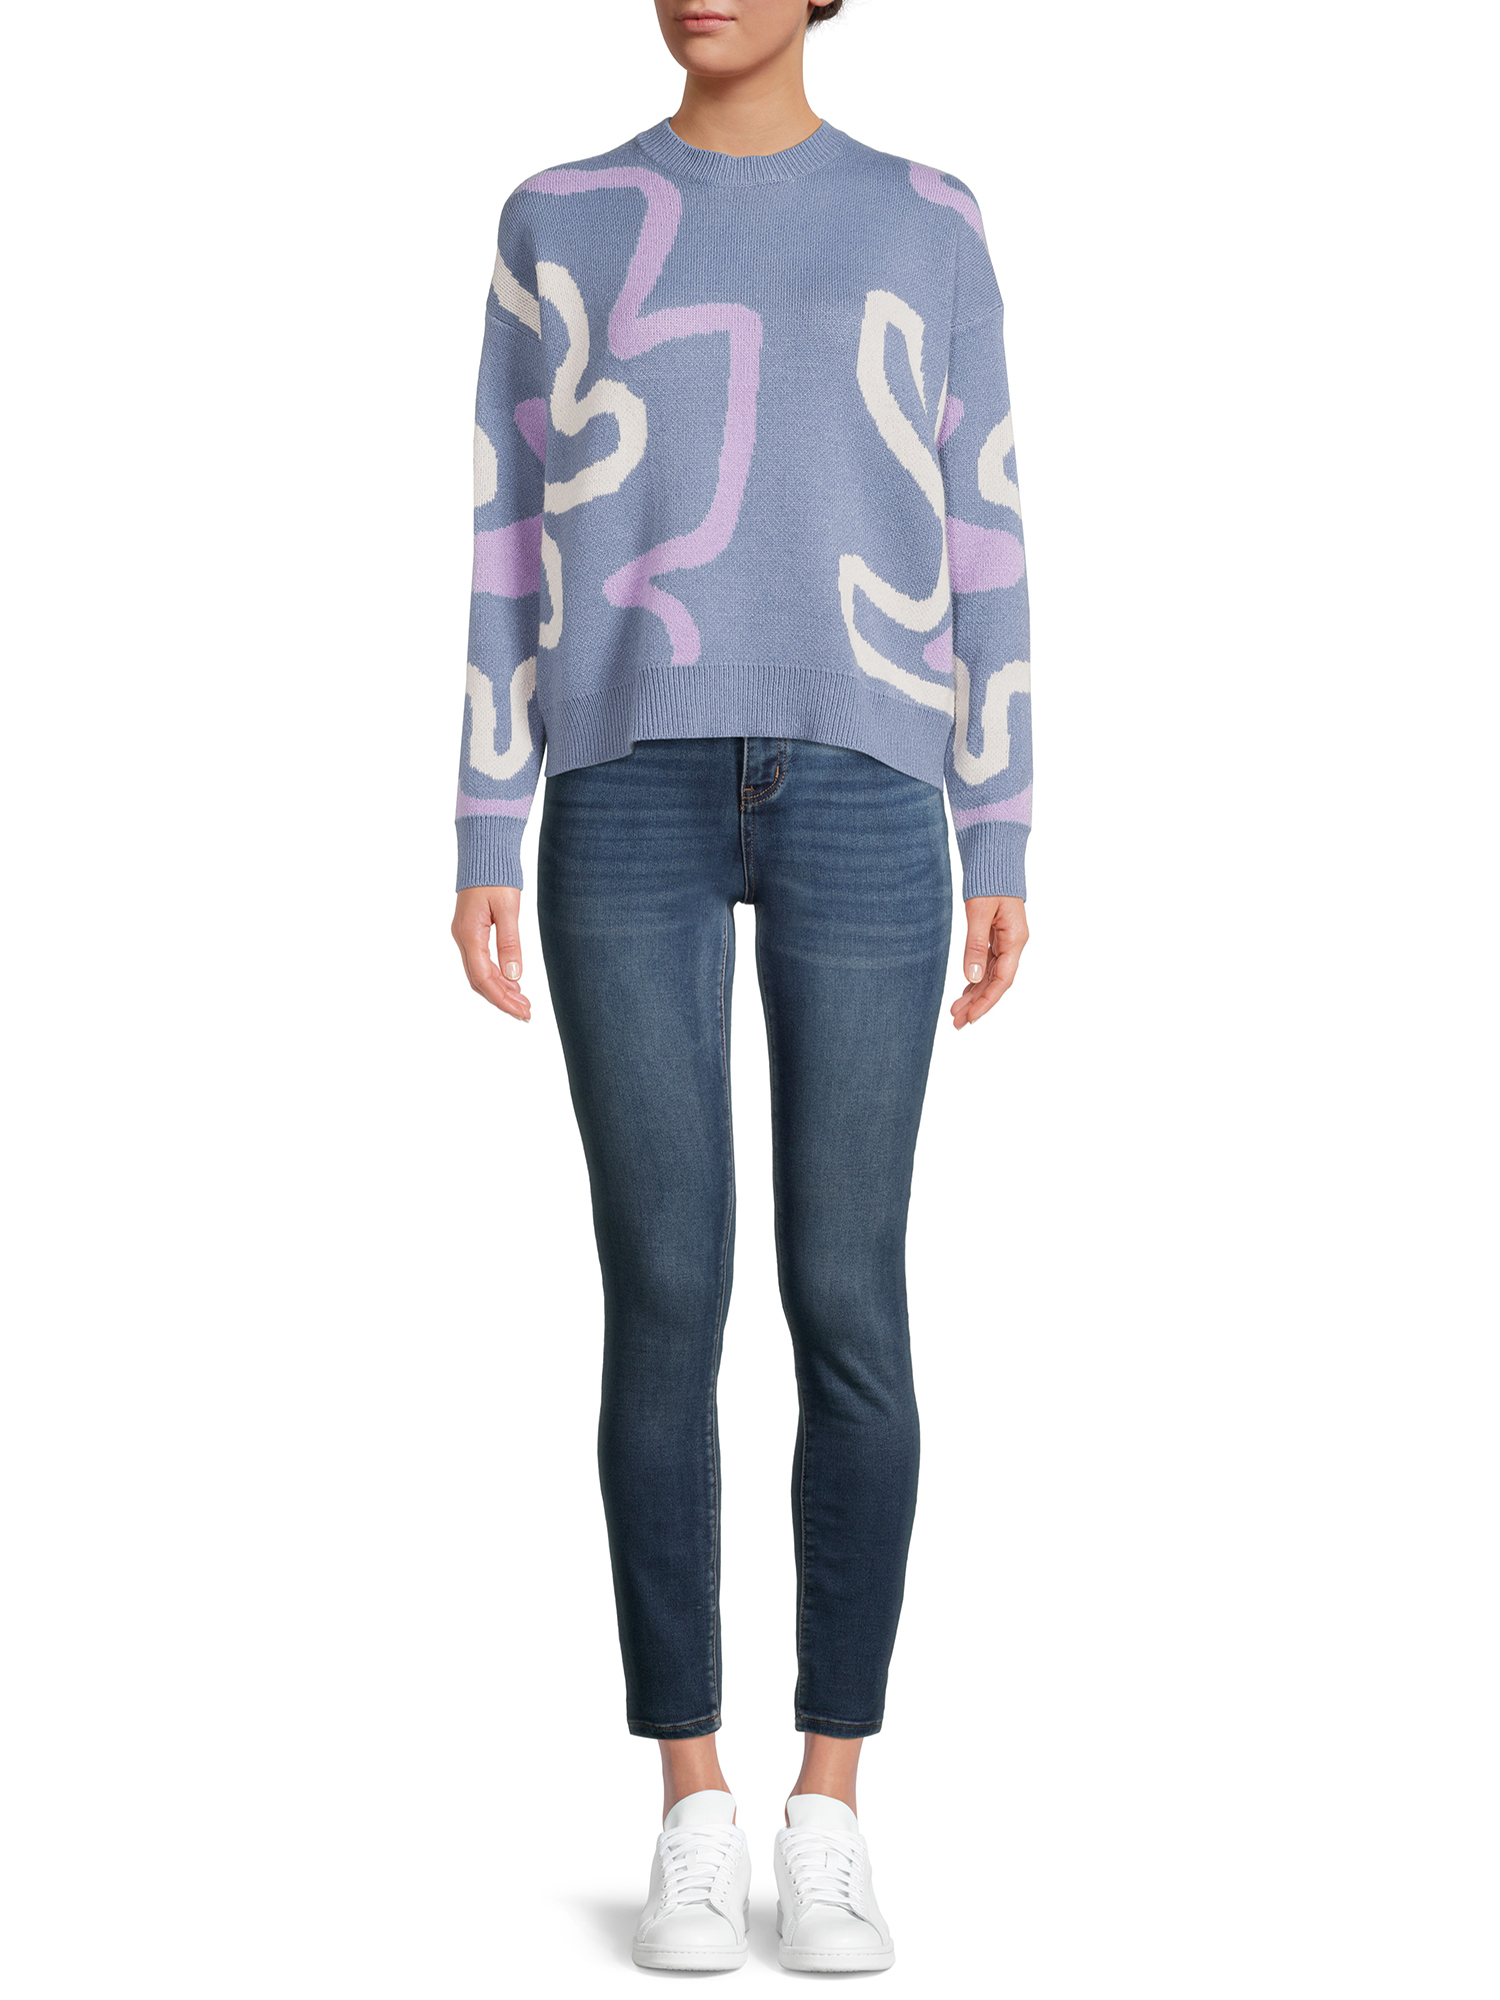 Dreamers by Debut Womens Print Pullover Long Sleeve Sweater - image 2 of 5